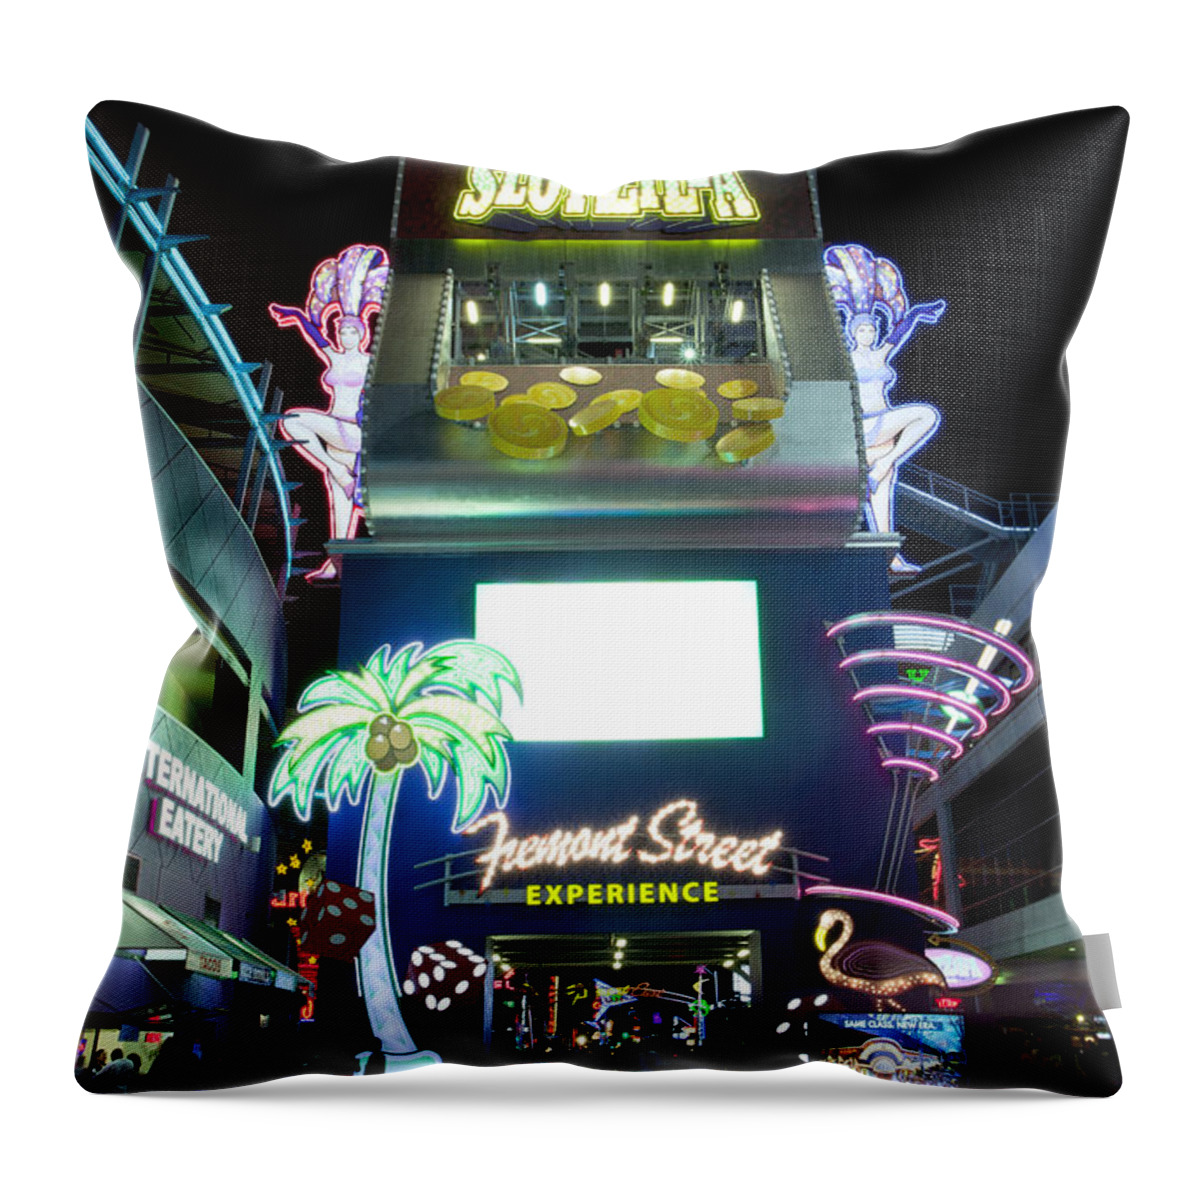 Slotzilla Throw Pillow featuring the photograph Slotzilla by Anthony Totah